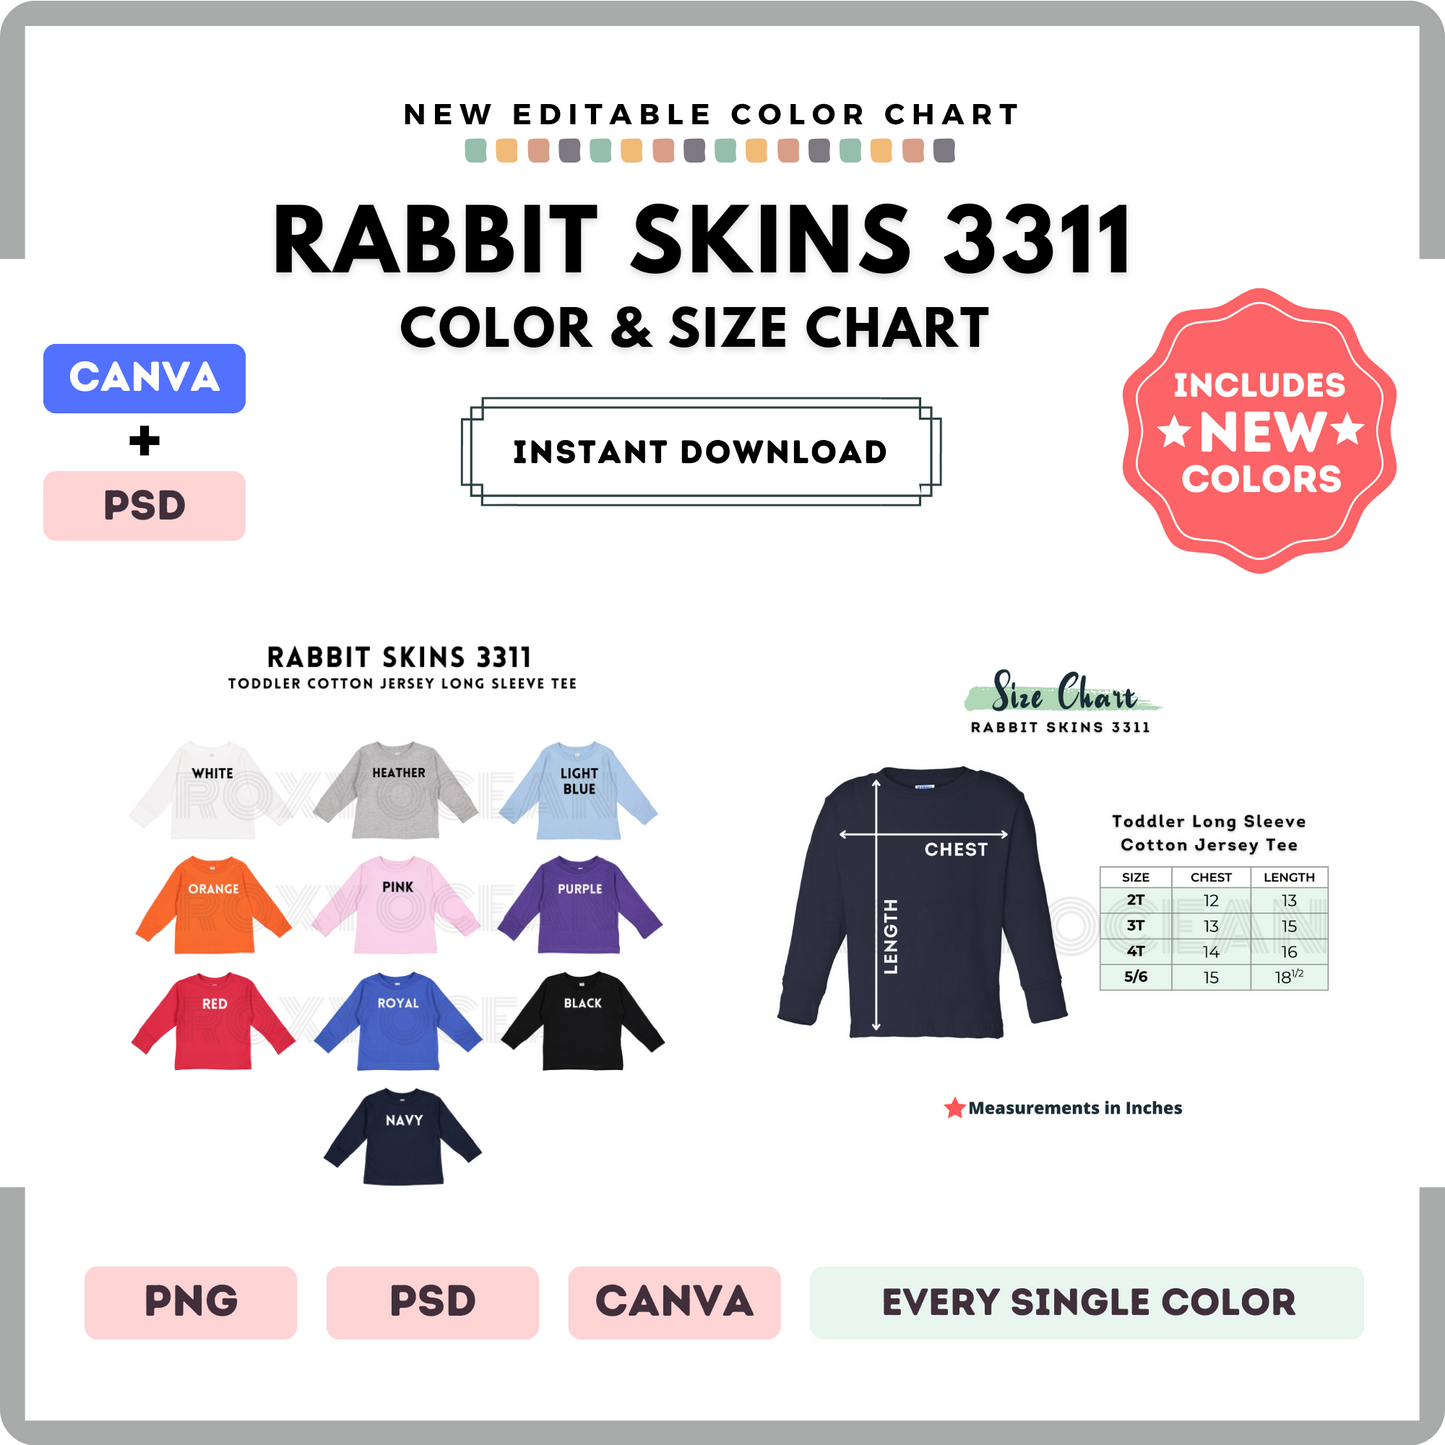 Rabbit Skins 3311 Color and Size Chart